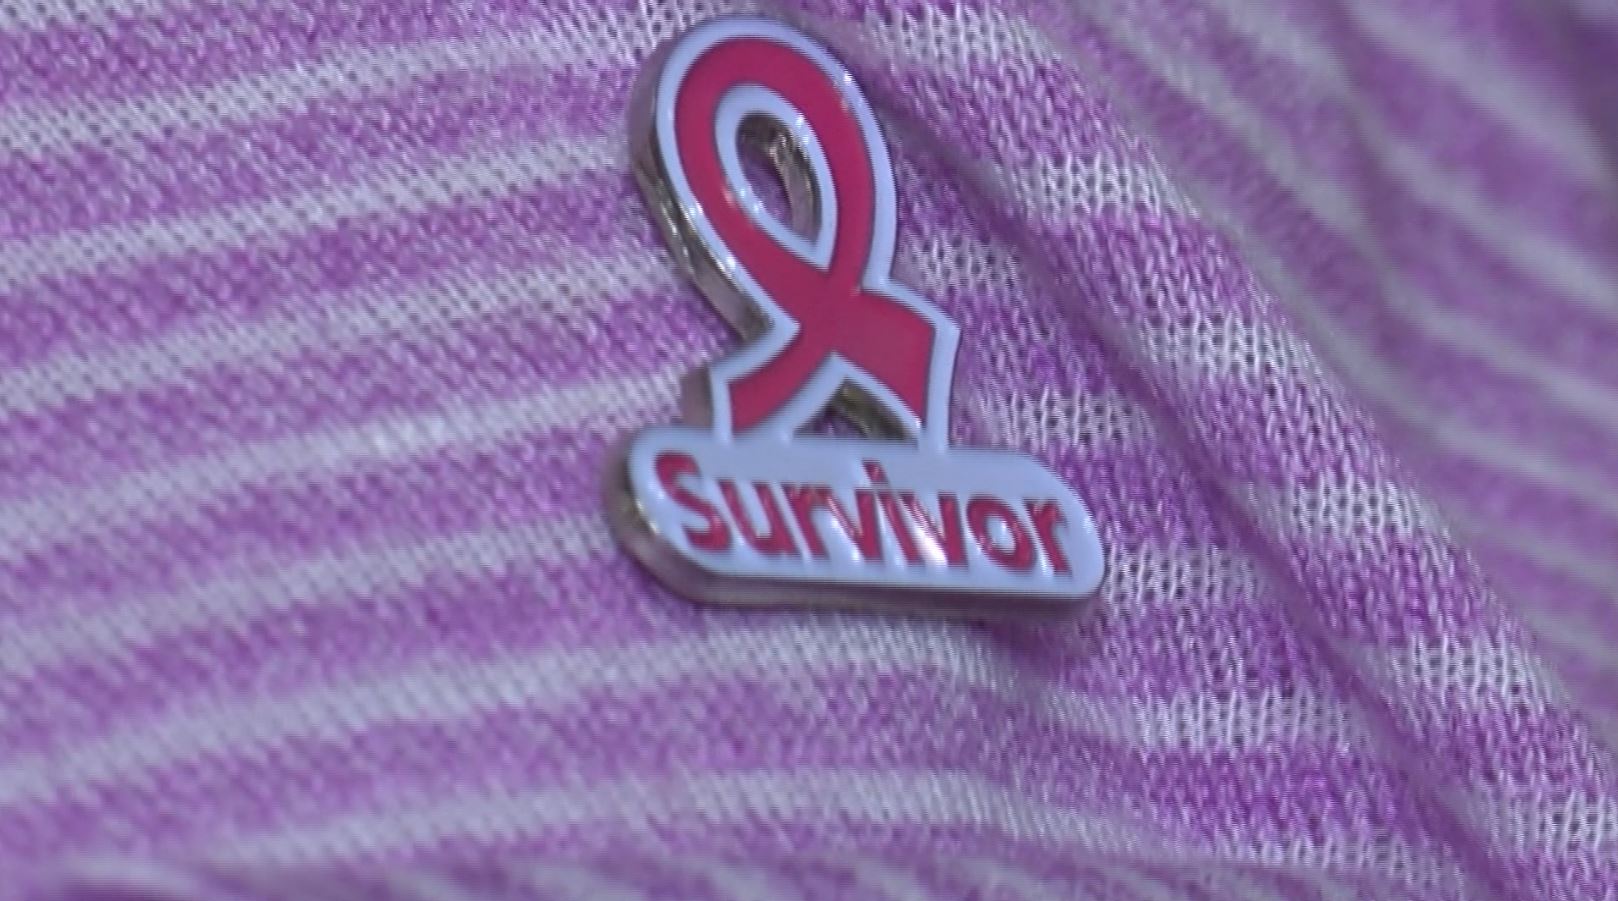 Are all the pink ribbons helping to cure cancer? - Deseret News